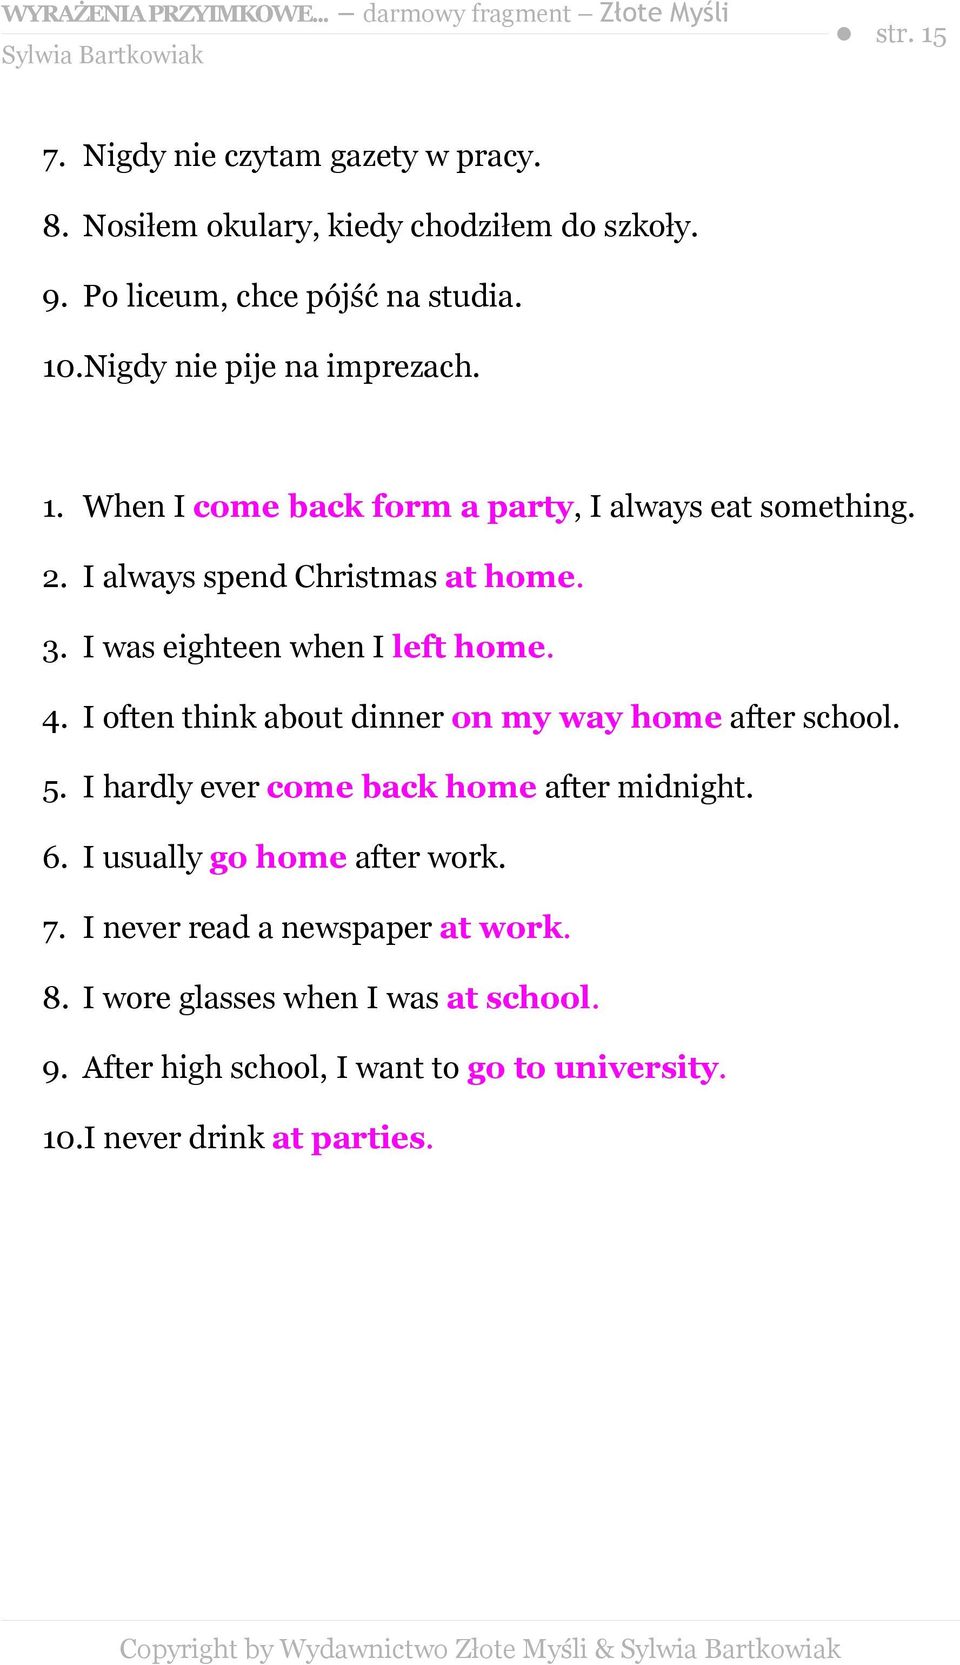 I was eighteen when I left home. 4. I often think about dinner on my way home after school. 5. I hardly ever come back home after midnight. 6.